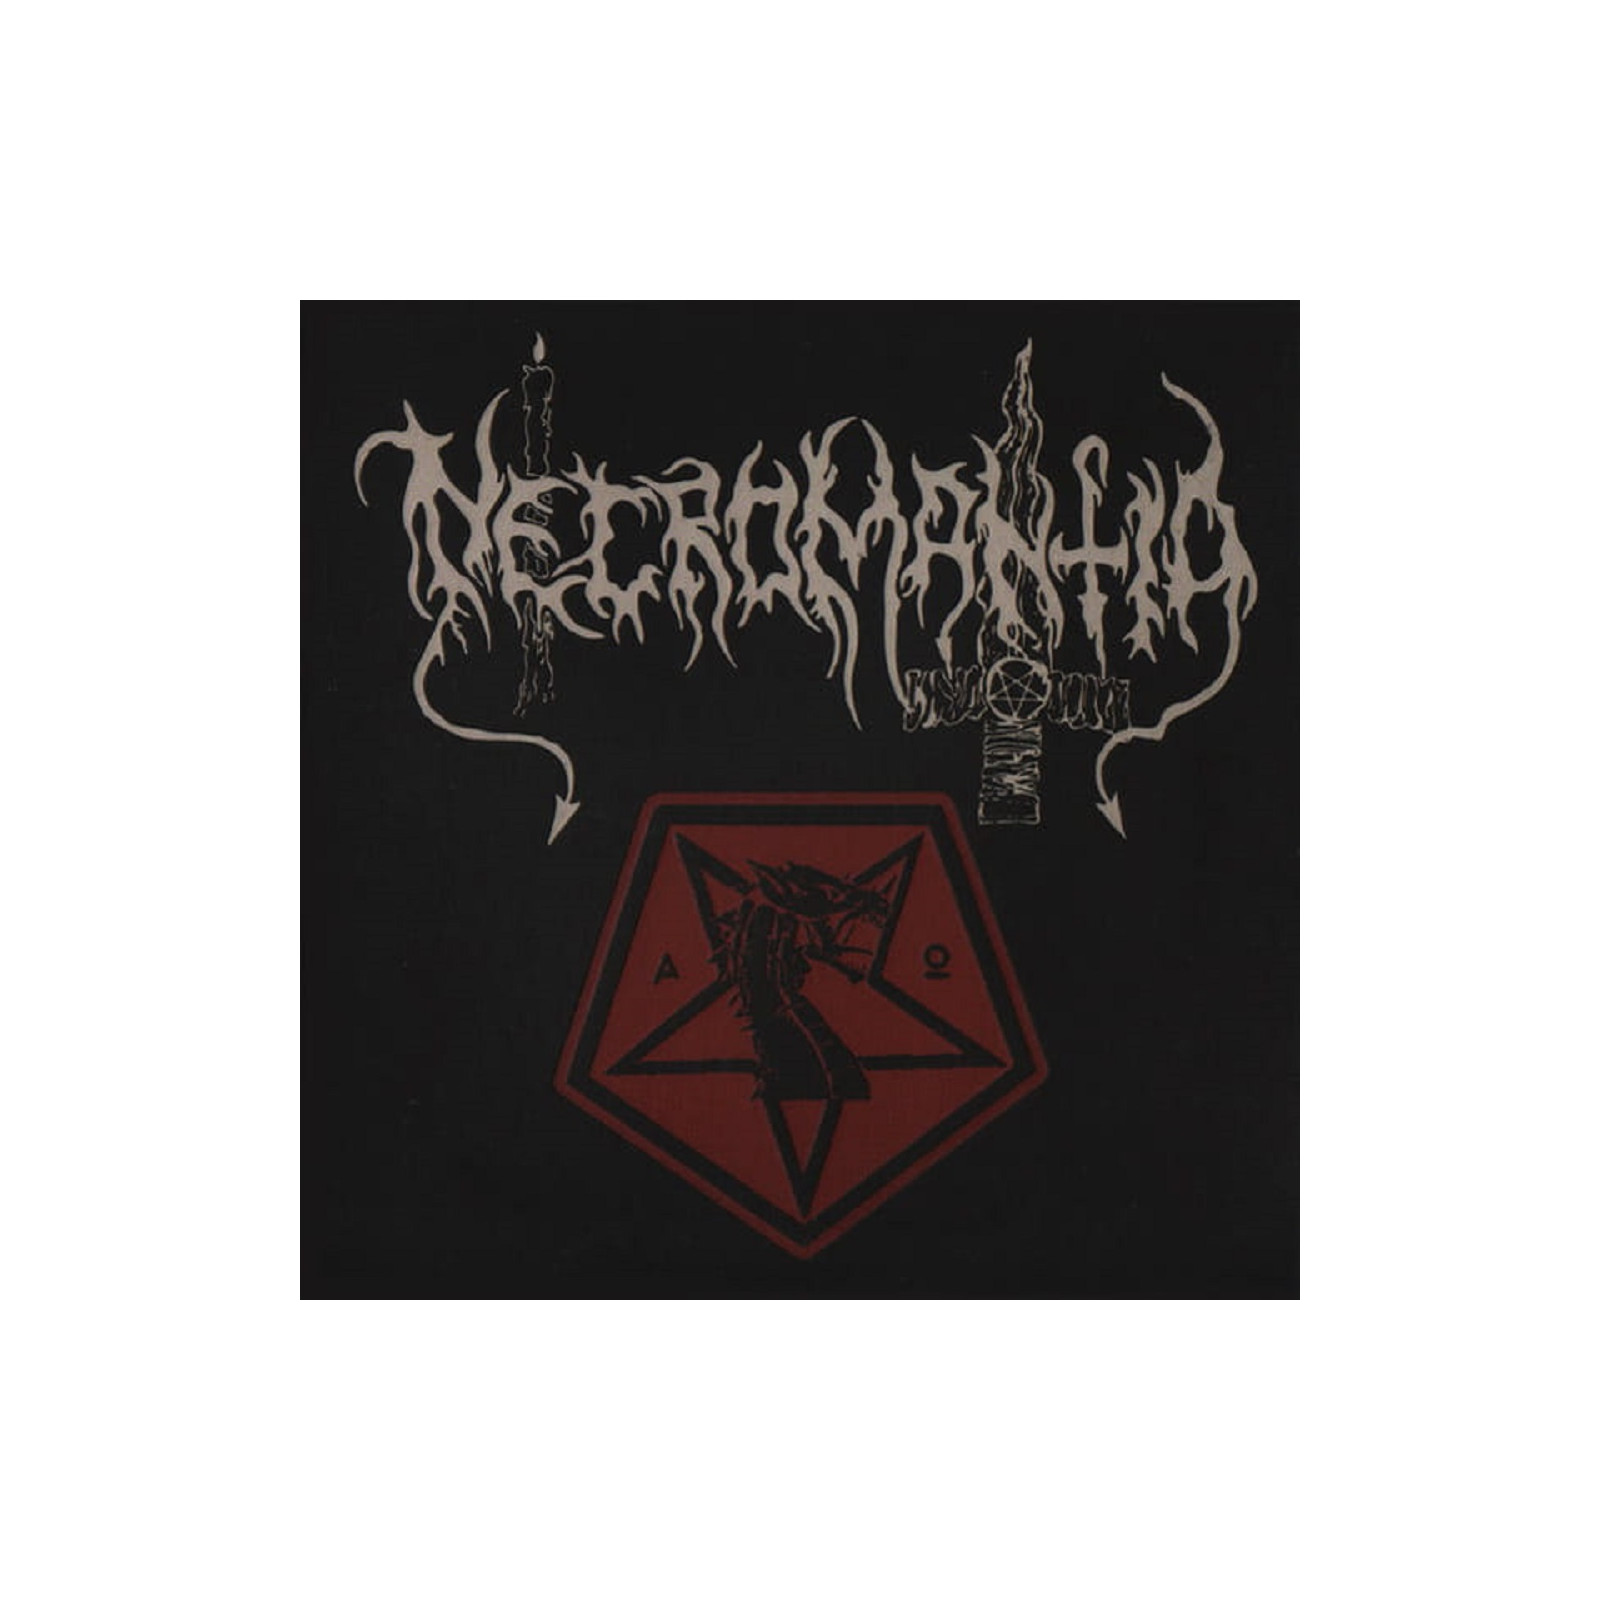 NECROMANTIA - Chthonic Years / Demo Collection   (Double CD)